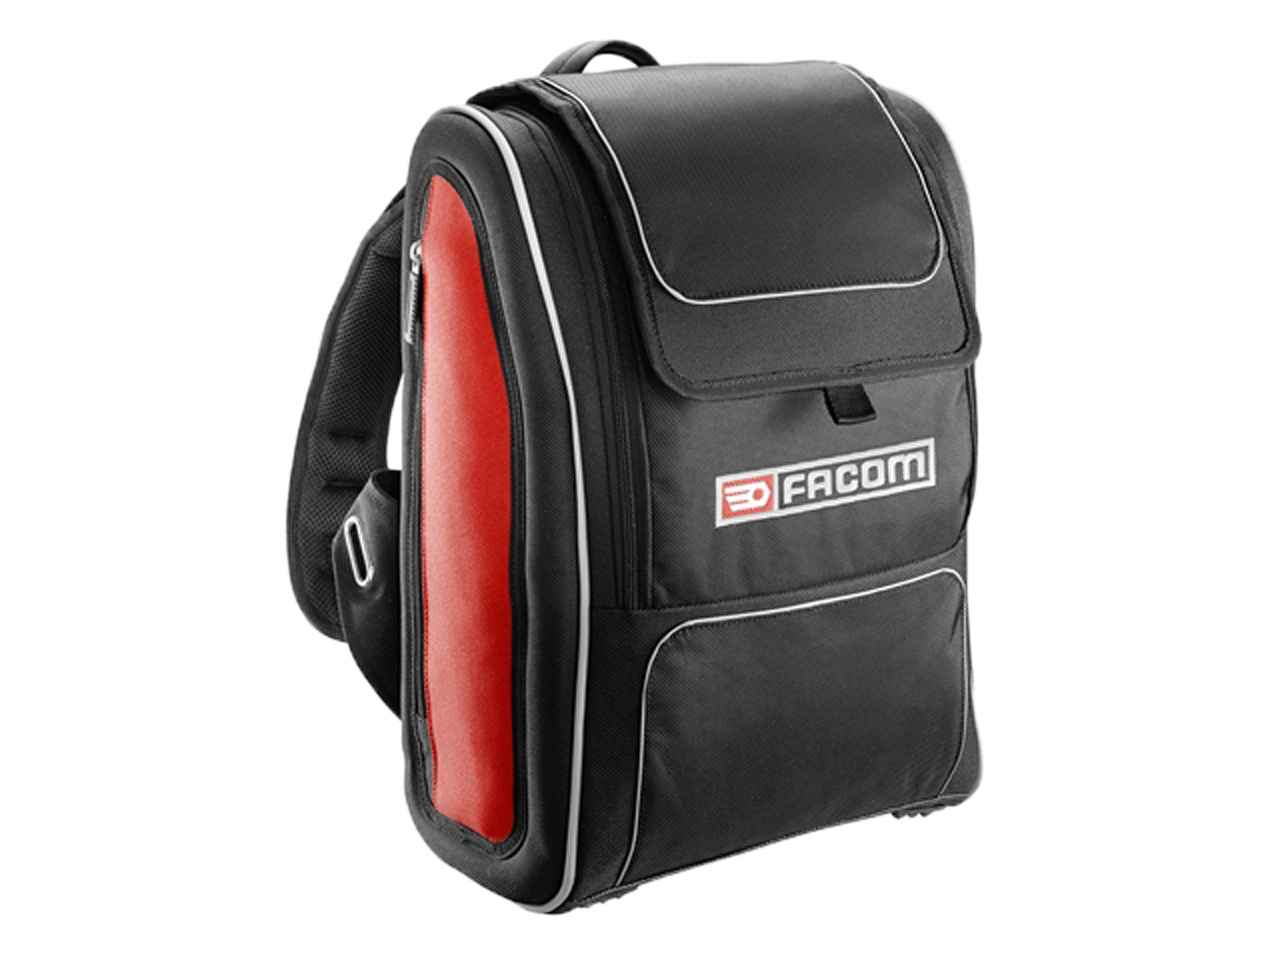 FACOM FACOM - Textile Bag for Tools and Laptop -… | DeinDeal